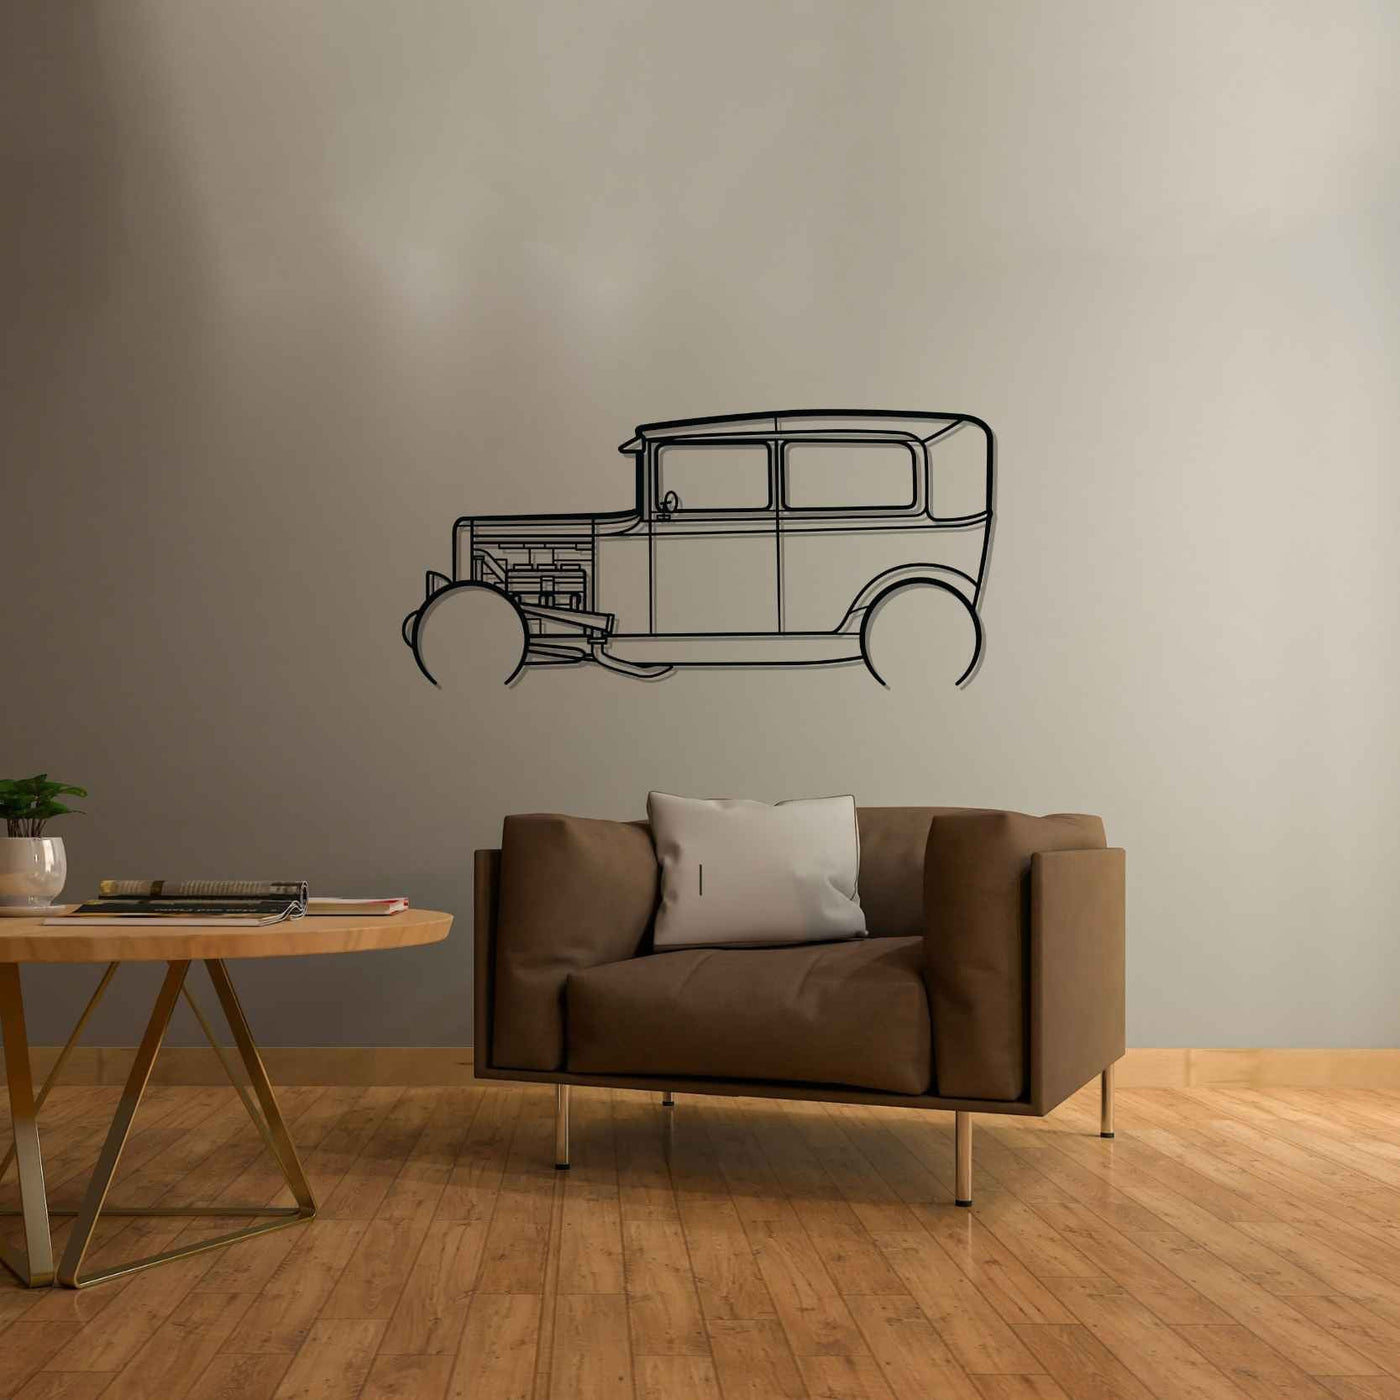 Model A 1931 Detailed Silhouette Metal Wall Art